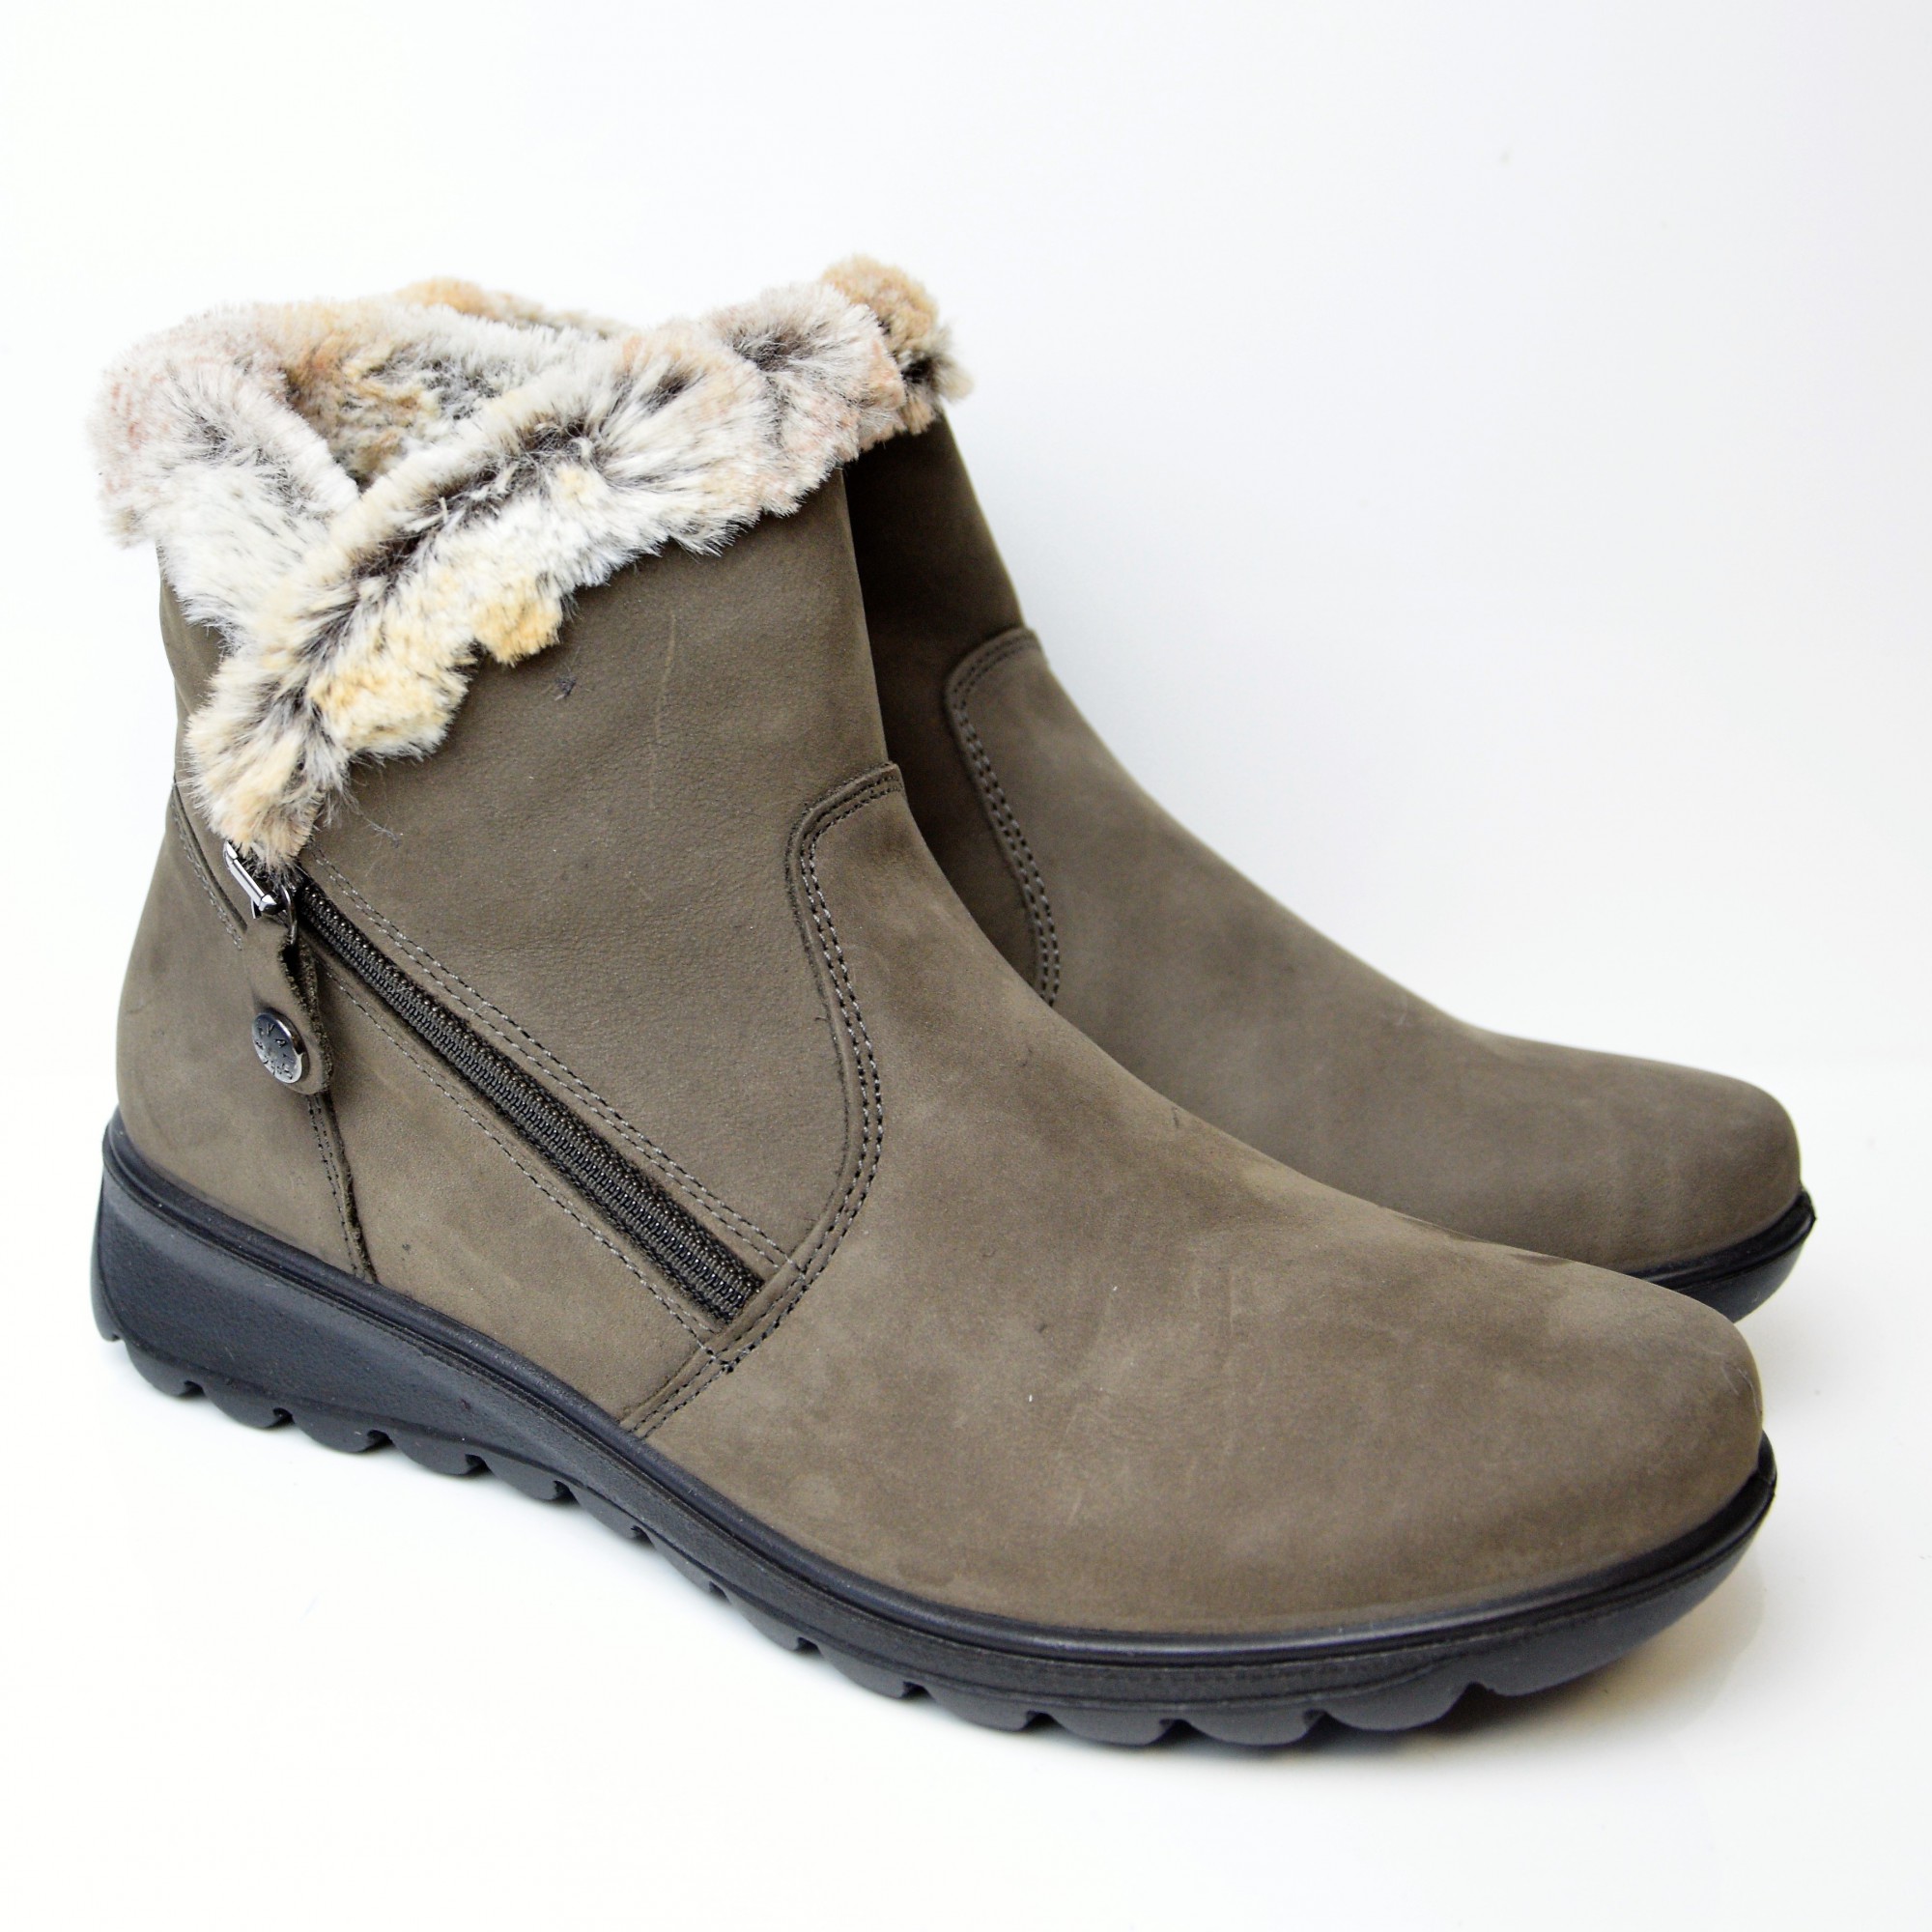 BOOT WITH WOOL REAL LEATHER TEEK 